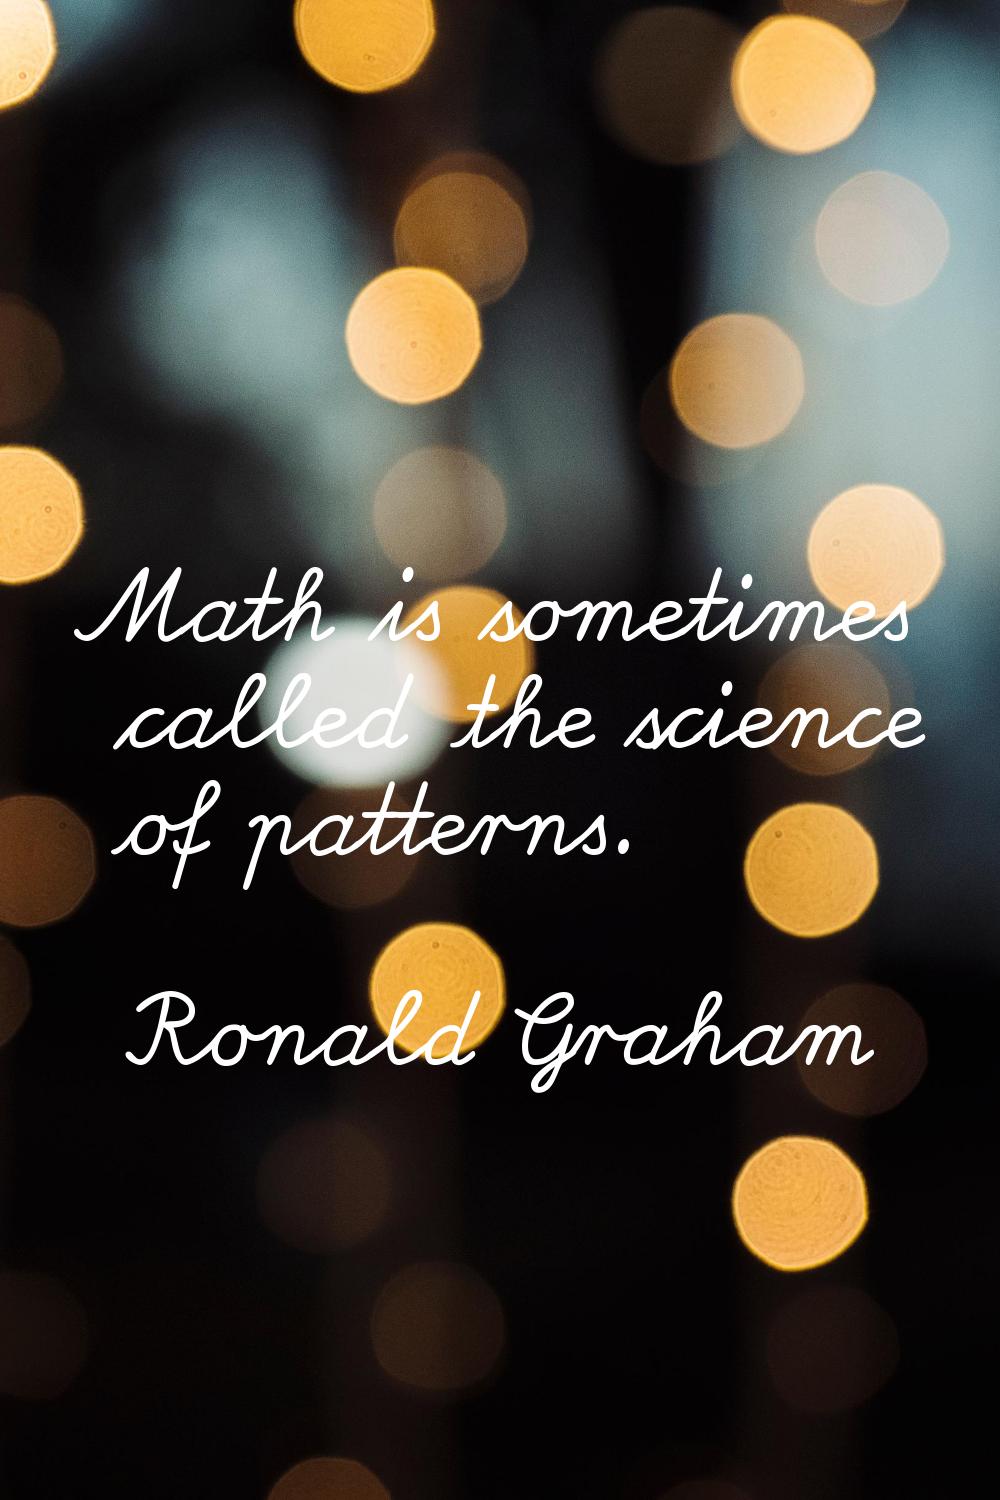 Math is sometimes called the science of patterns.